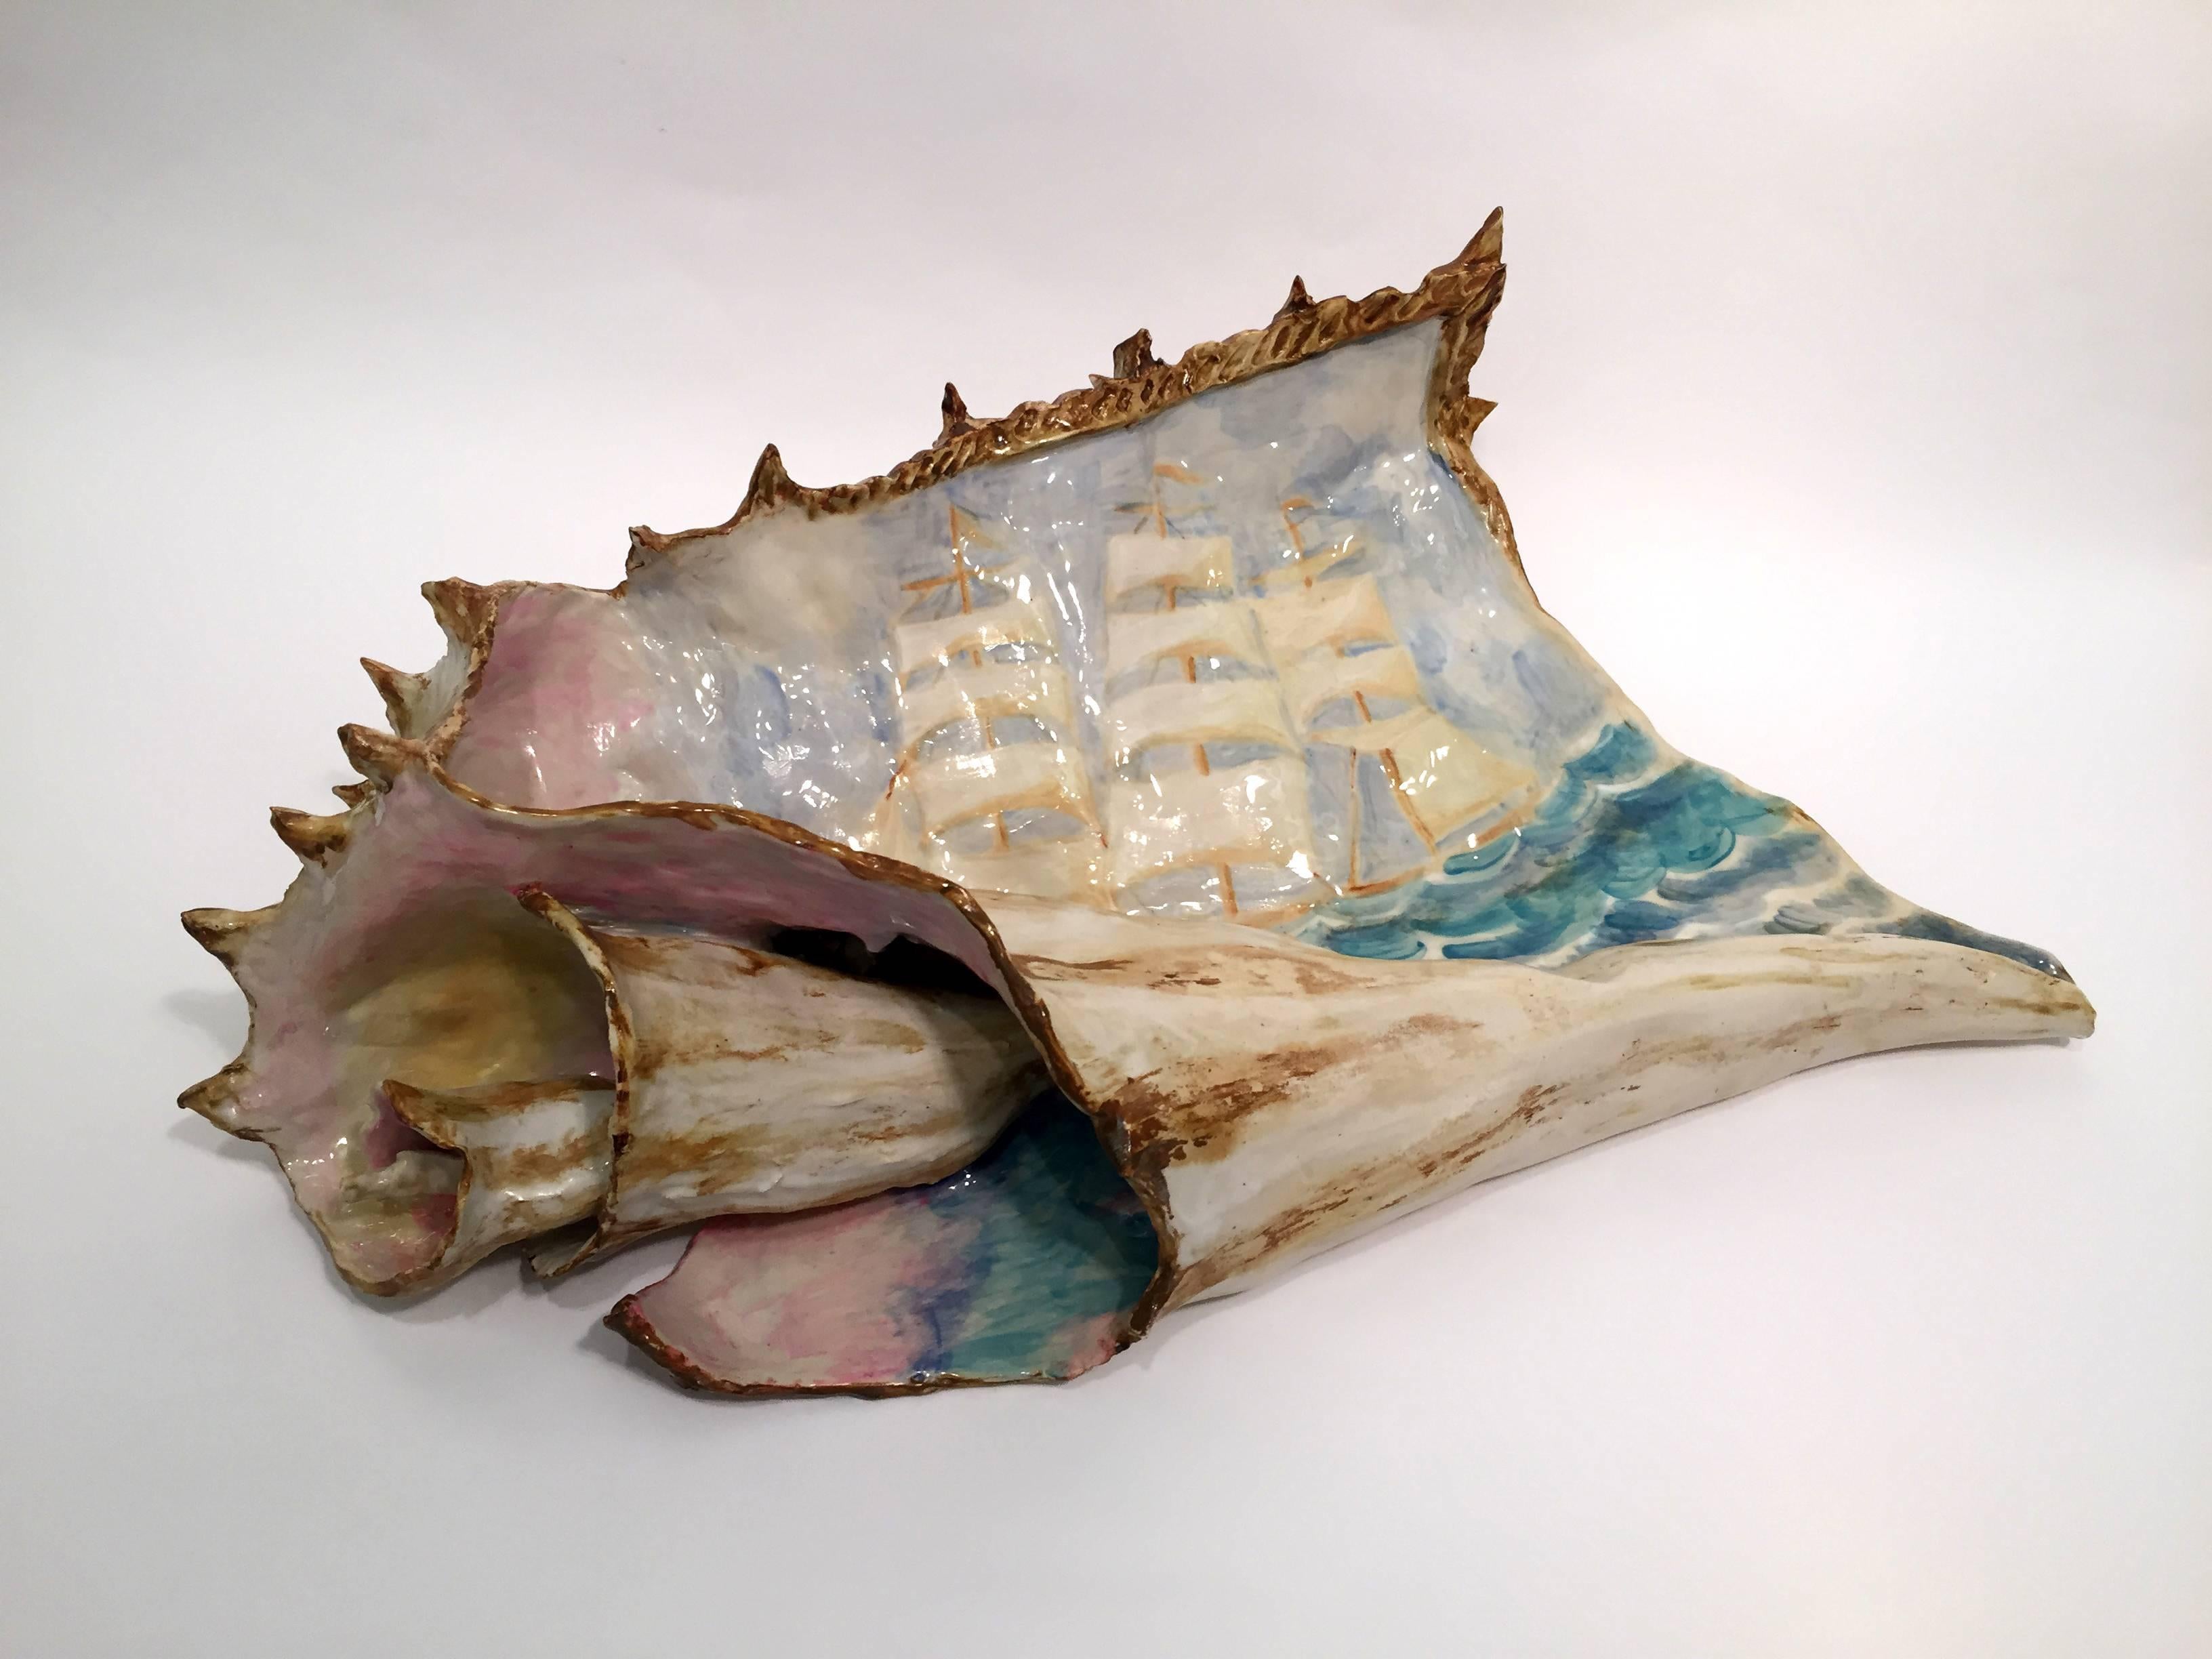 Clipper Ship and Broken Shell - Sculpture by Valerie Hegarty